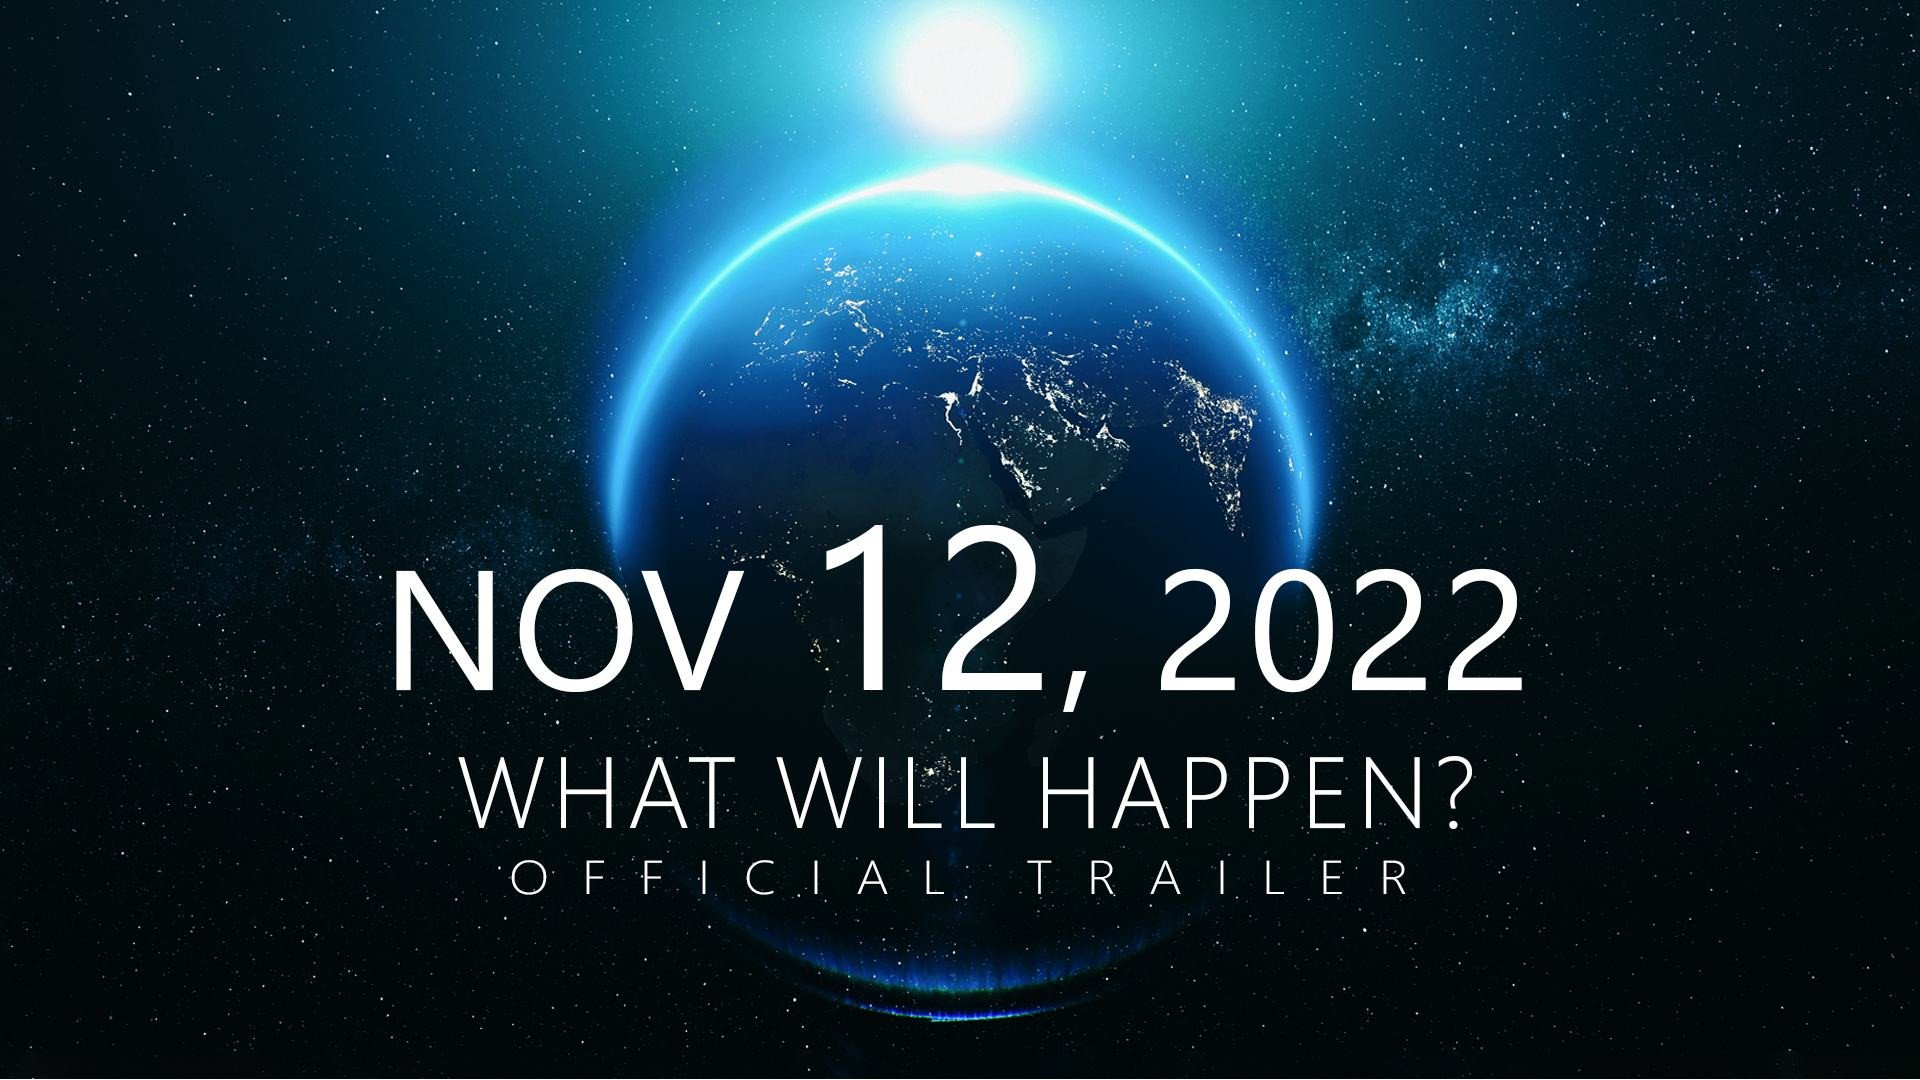 What Future Awaits Us? The Truth Will Be Revealed on November 12, 2022